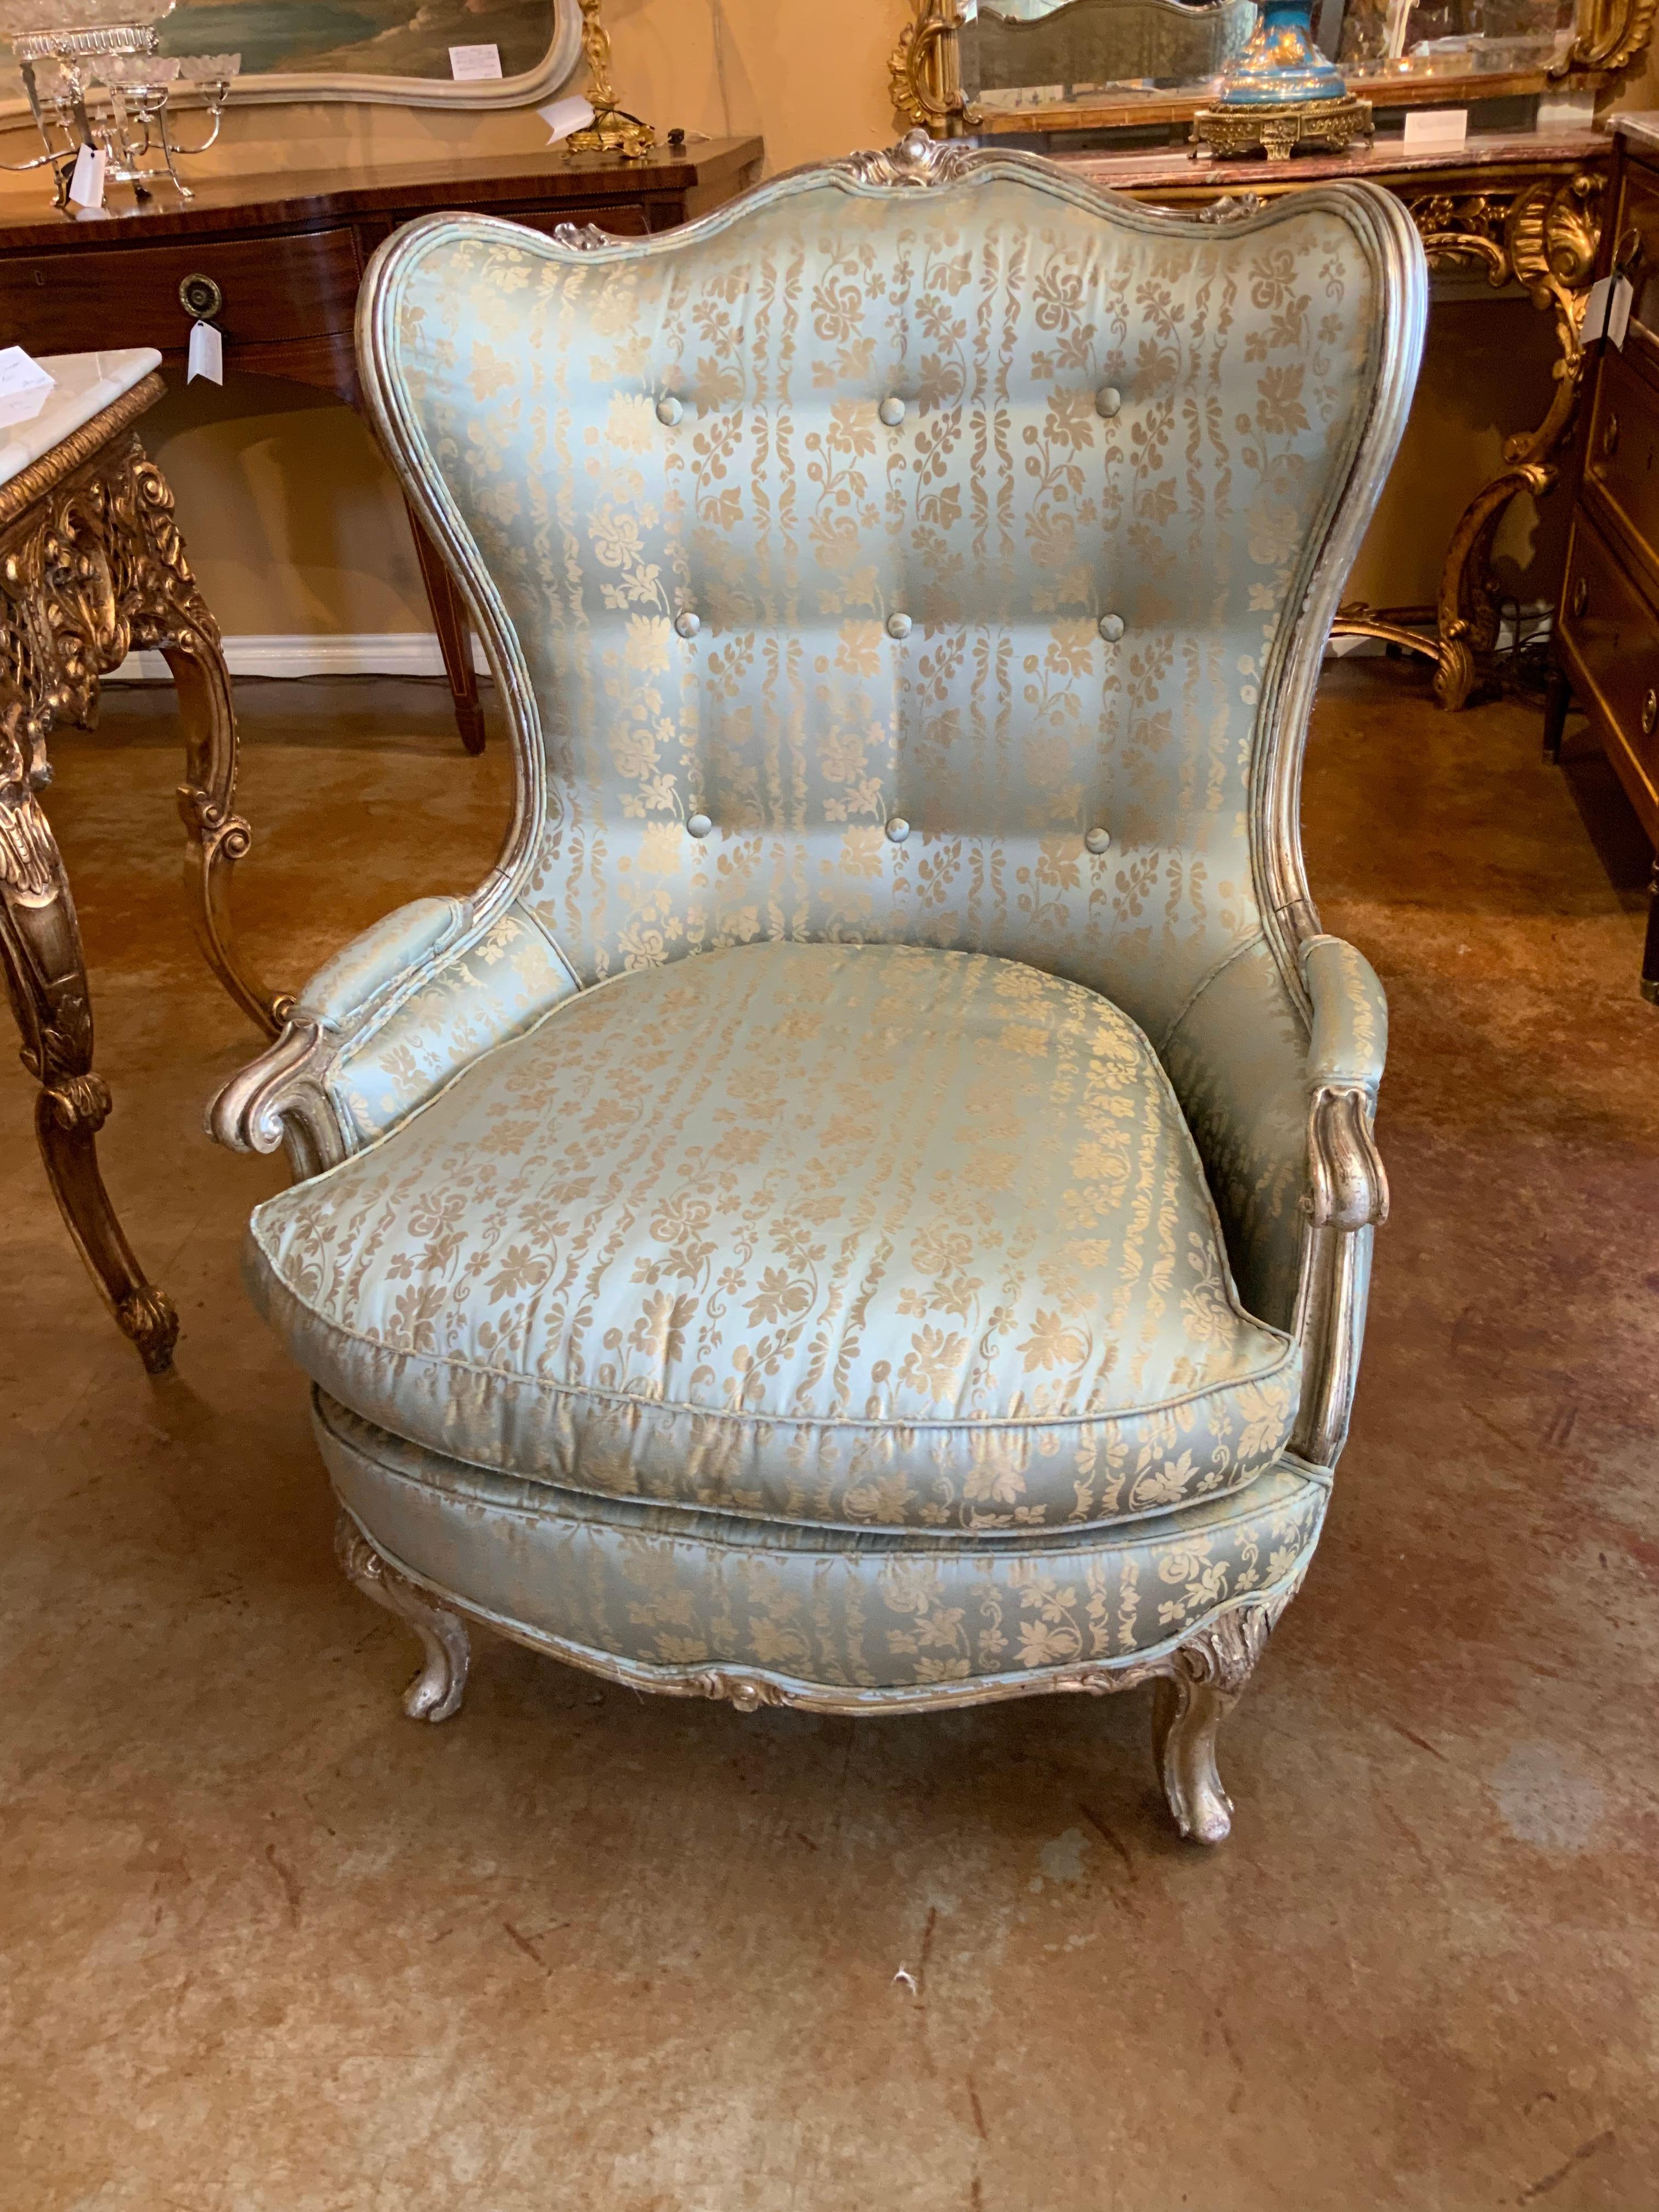 Large silver gilt bergere chair frames in Louis XV- style with cabriole legs
Center cartouche at the crest. Upholstered in a lovely aqua and cream print silk
Fabric without spots or stains.